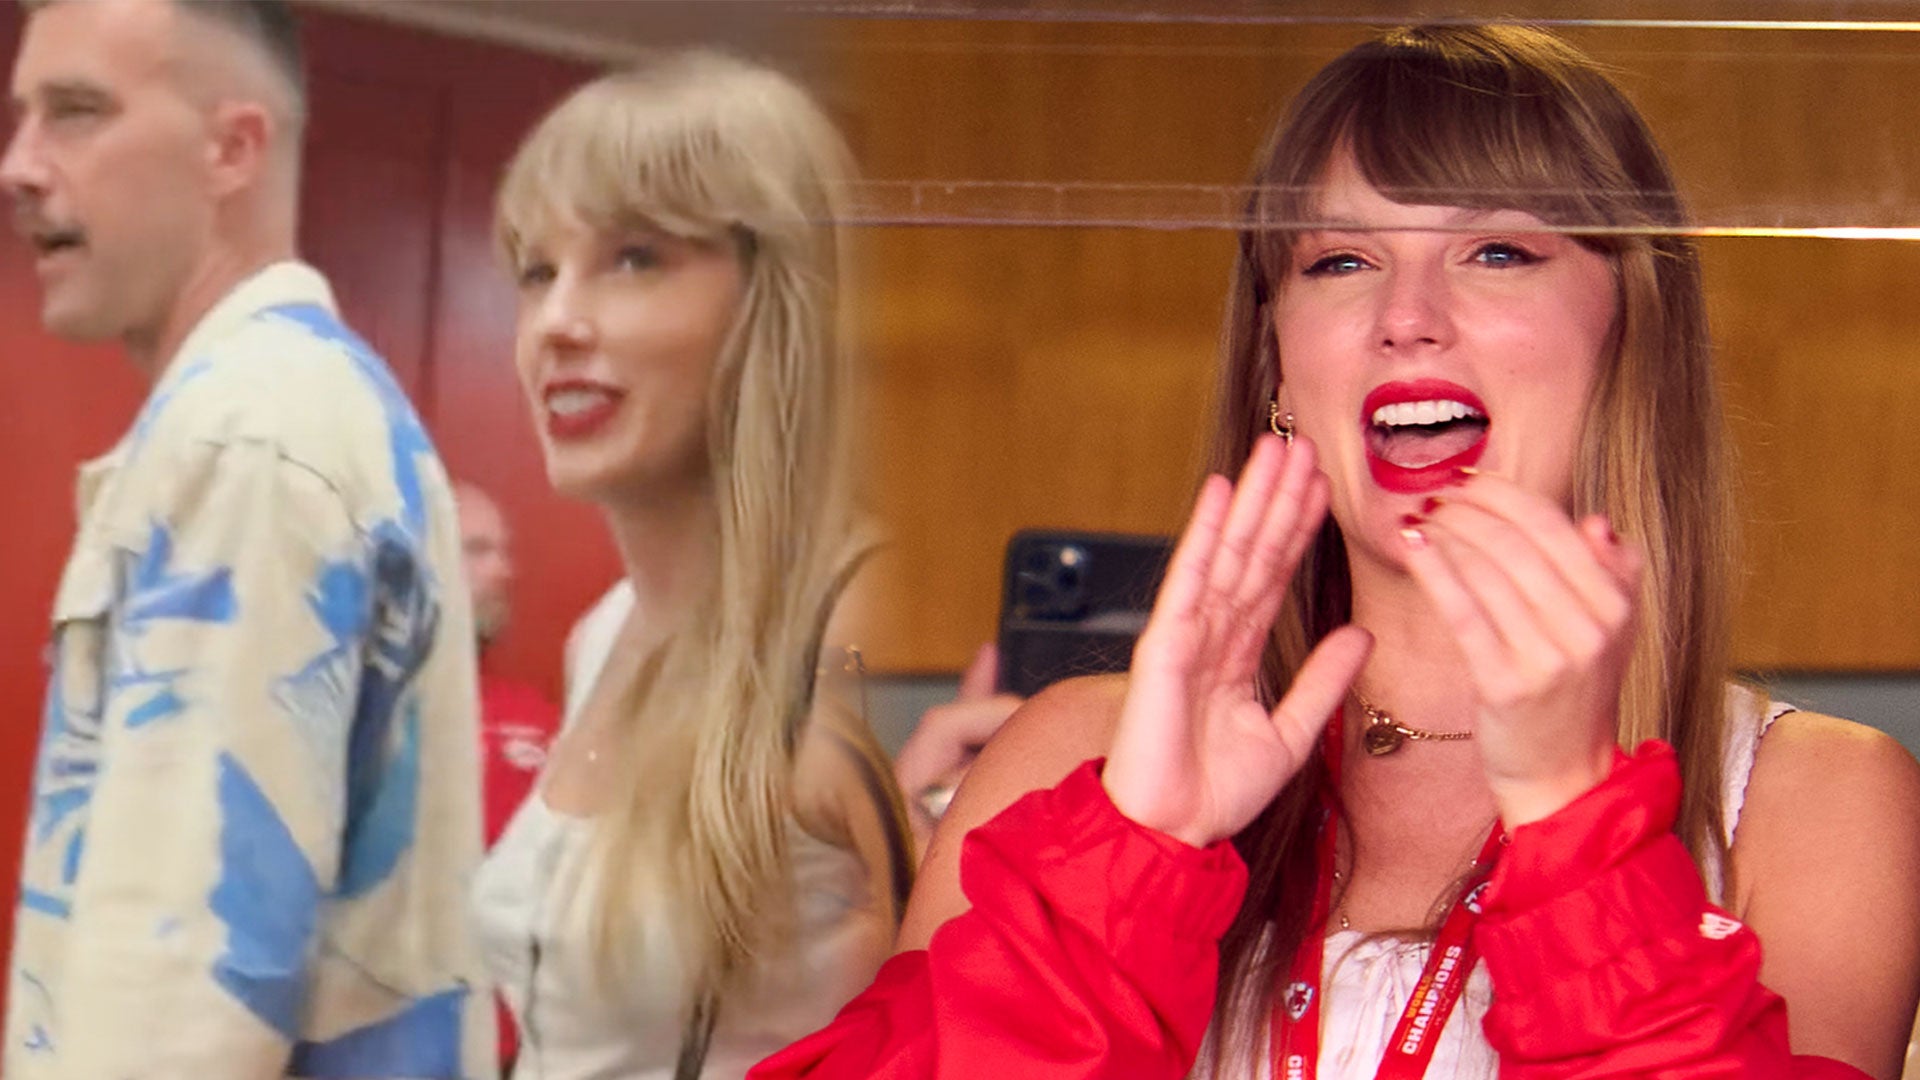 Travis Kelce Wears Taylor Swift's Curtains to Sunday's Game